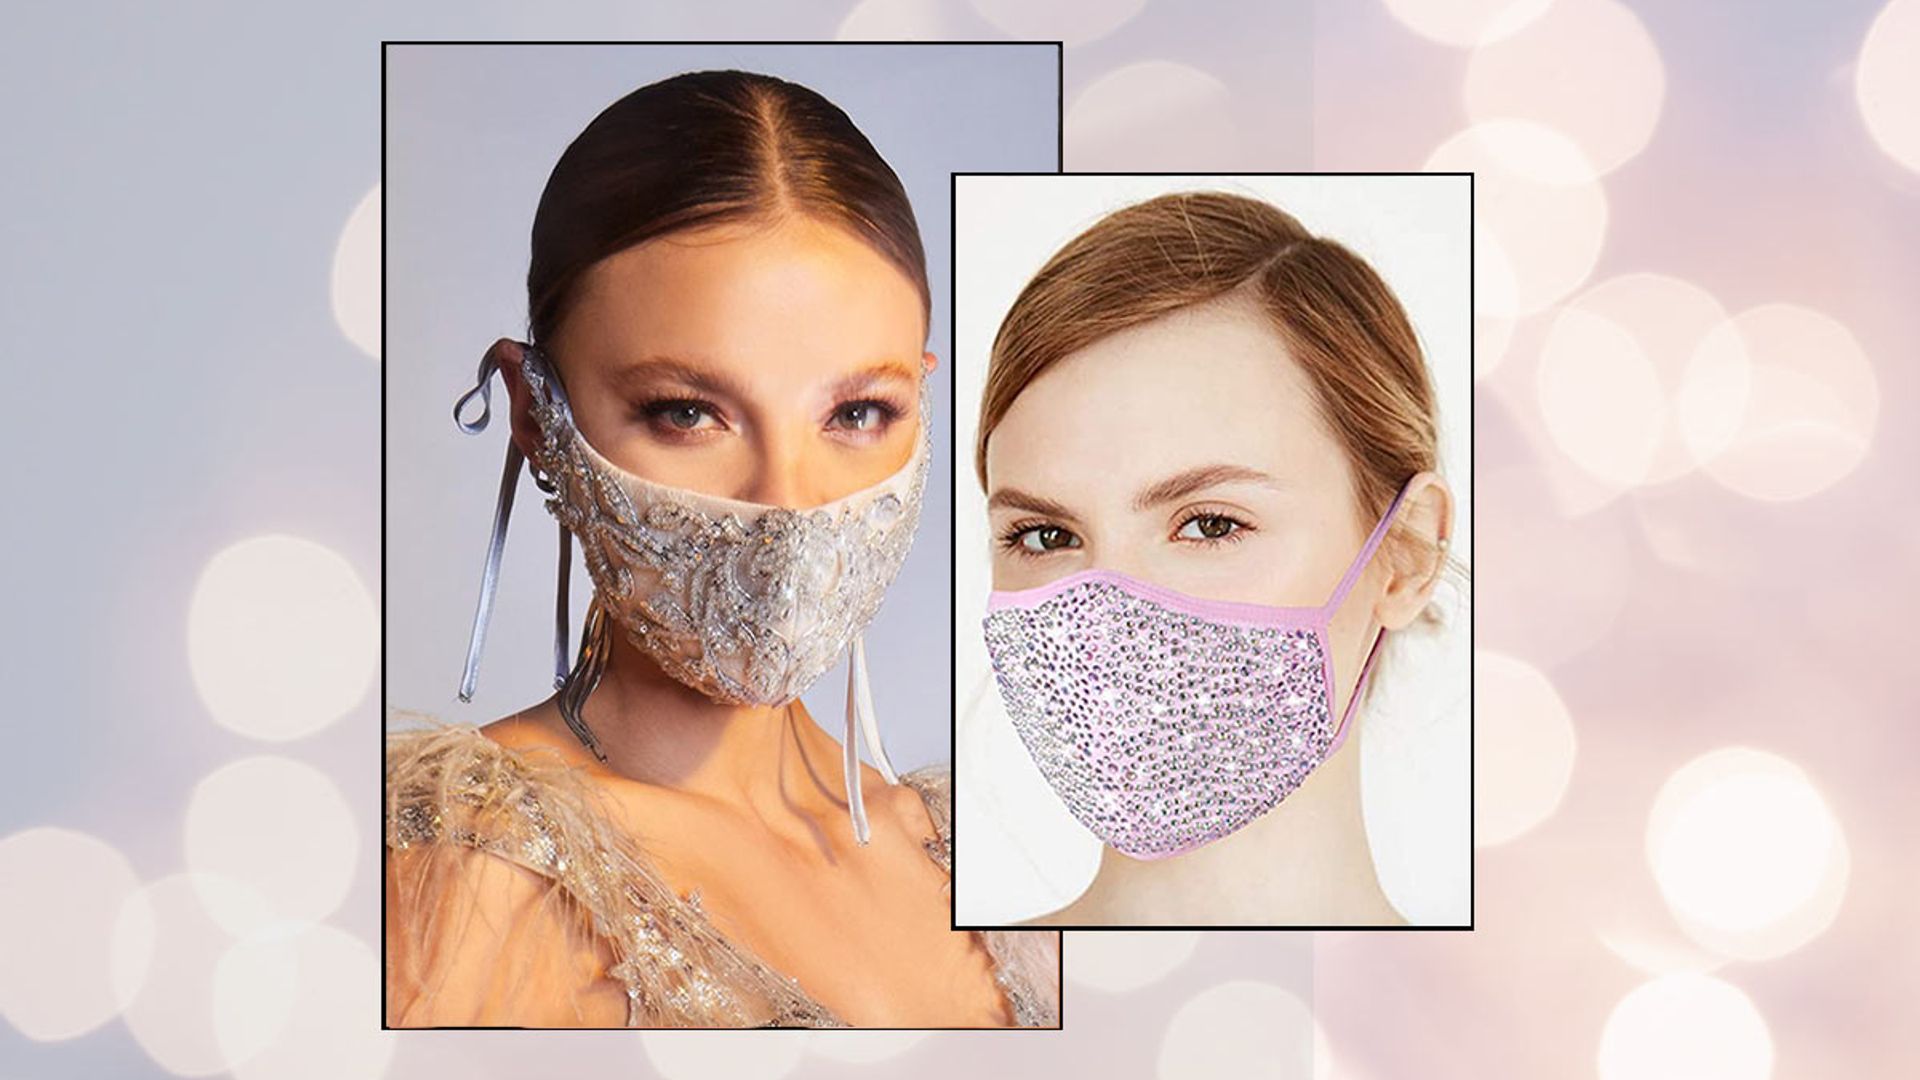 11 gloriously bejewelled face masks: Rhinestones, pearls & gems – oh my!